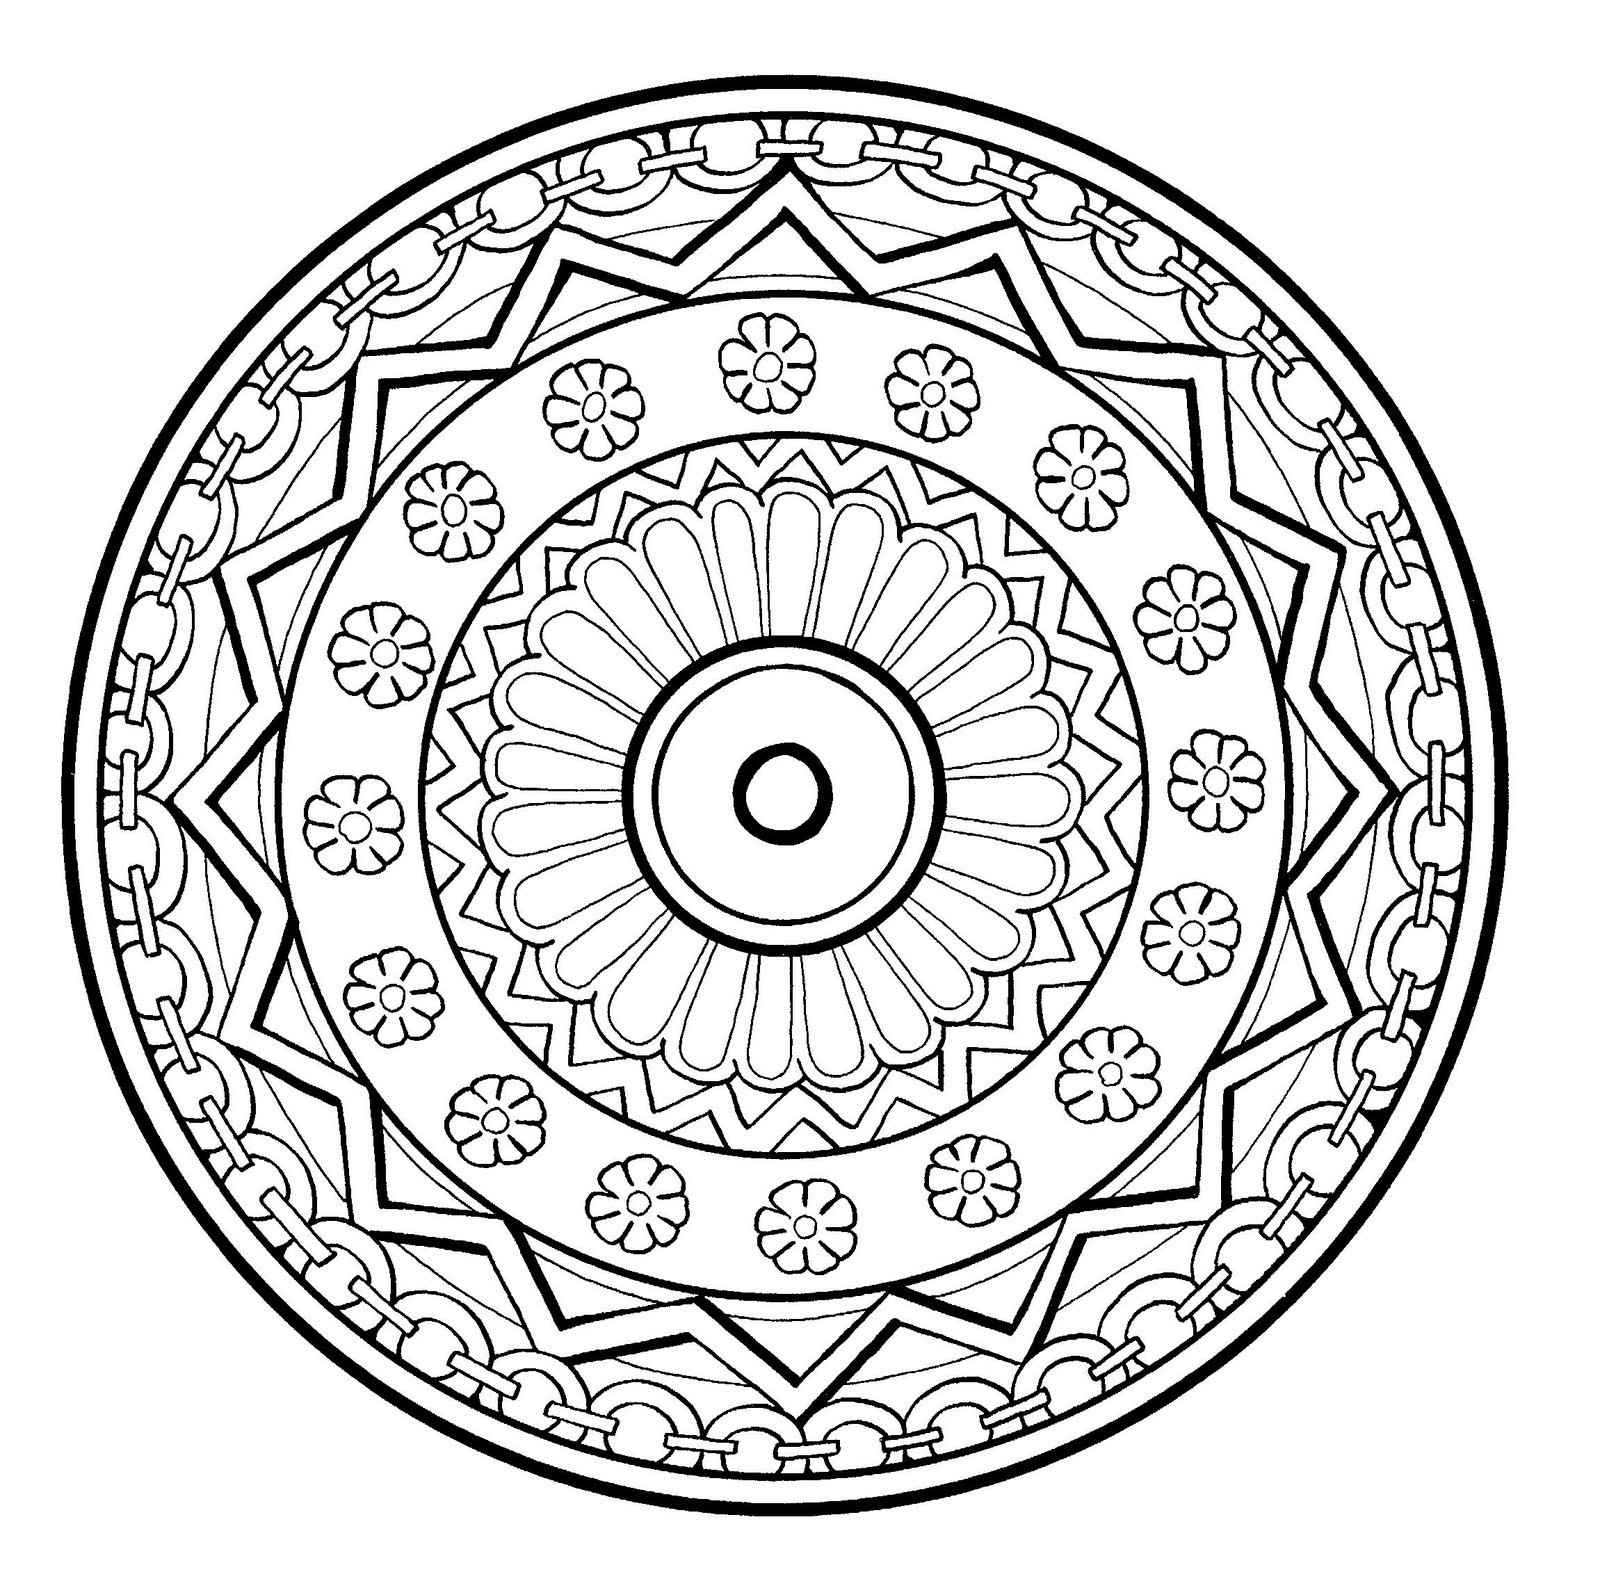 Coloring Pages For Adults Mandala
 28 Free Printable Mandala Coloring Pages for Adults